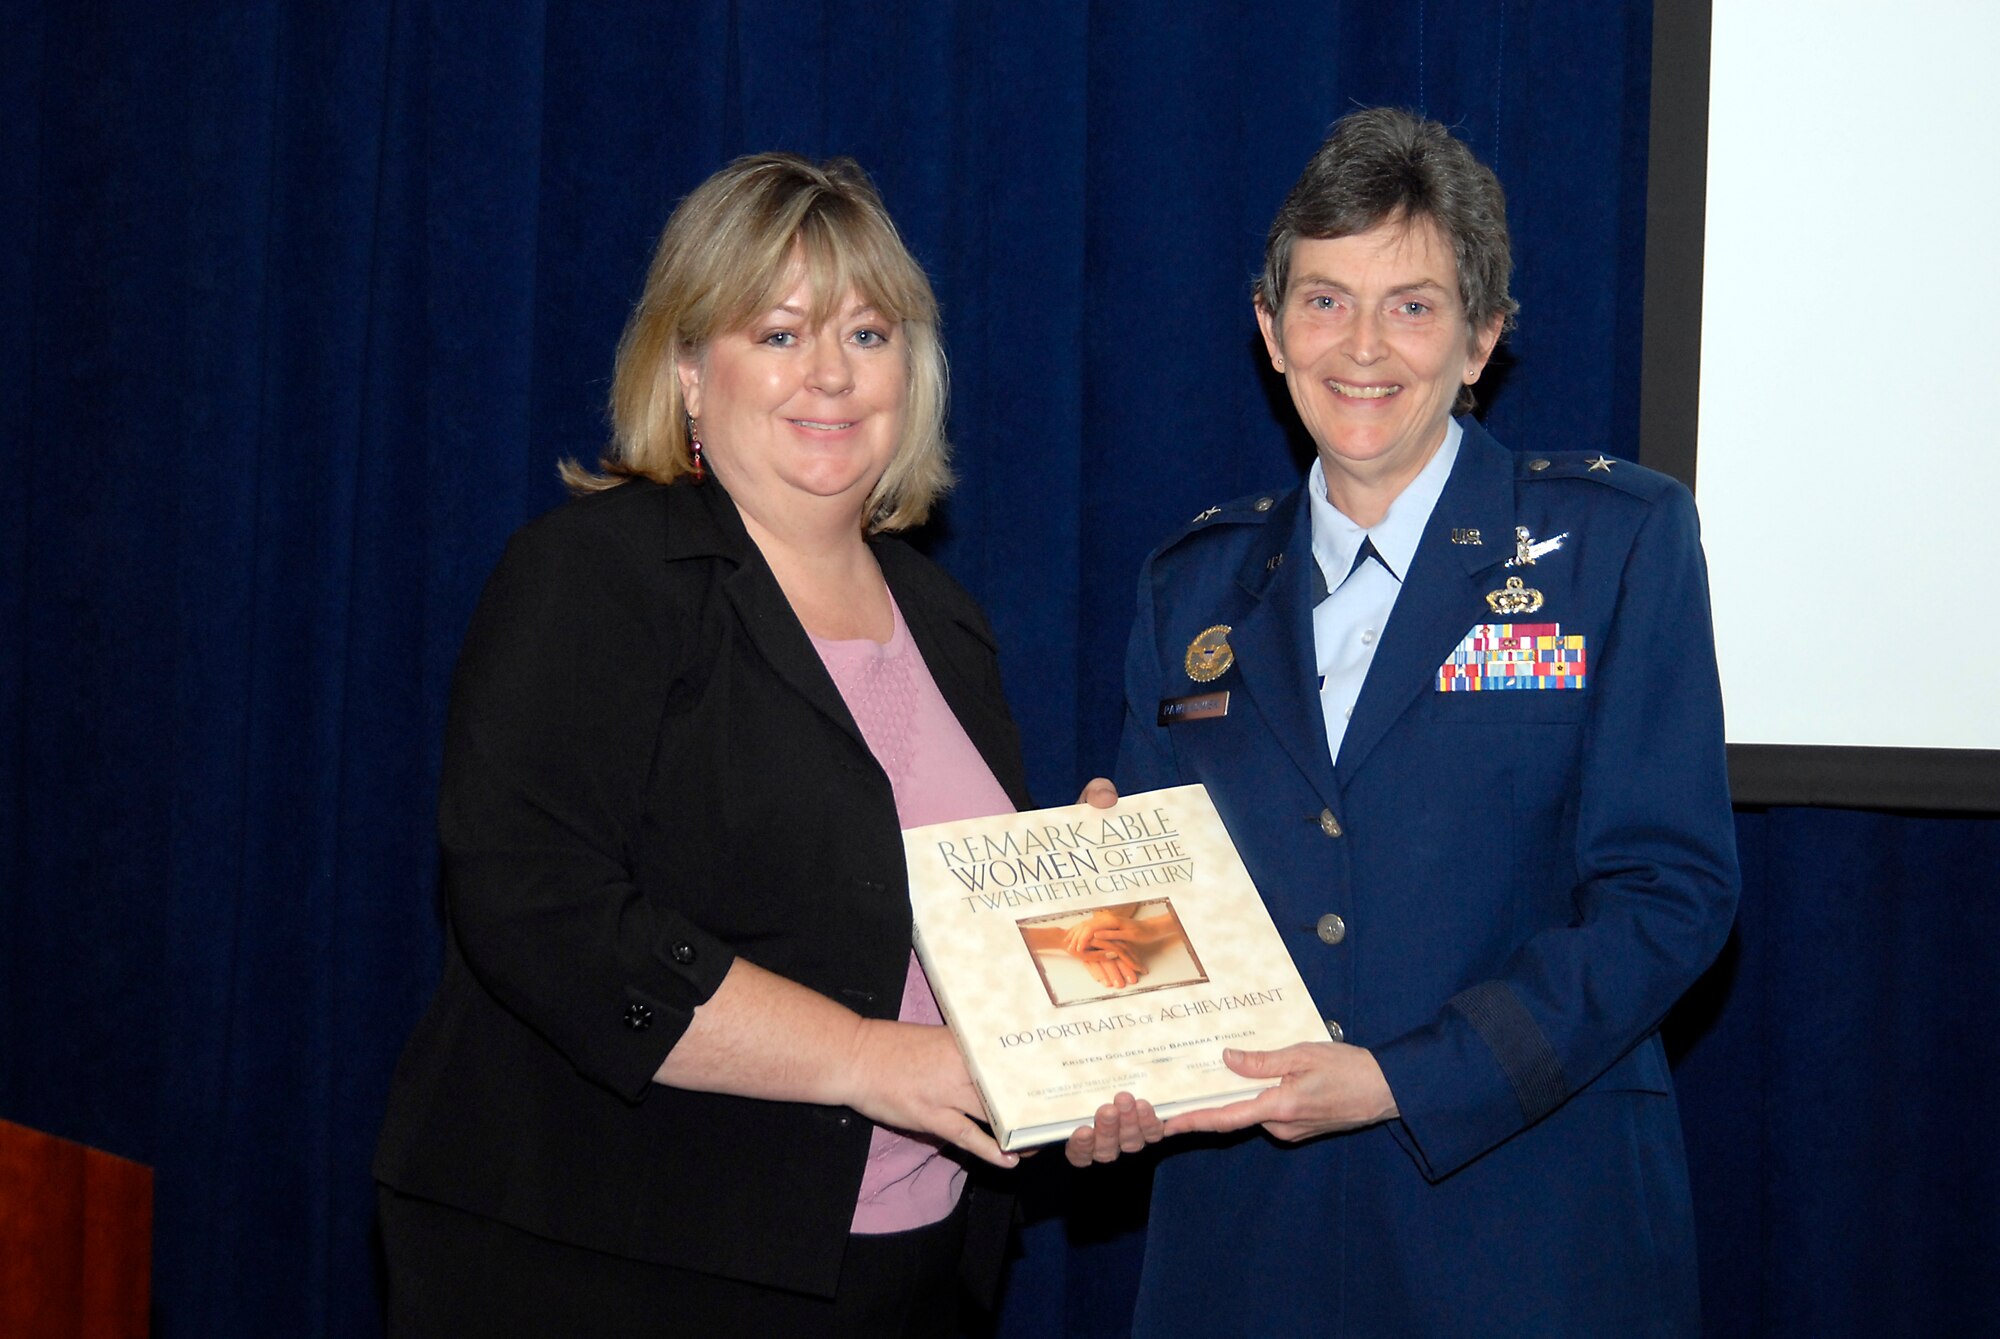 At the conclusion of the Women's History Month luncheon, SMC Vice Commander Brig. Gen. Pawlikowski was presented with a token of appreciation by Los Angeles AFB Federal Women's Program Manager Beverly Campbell.  (Photo by Joe Juarez)